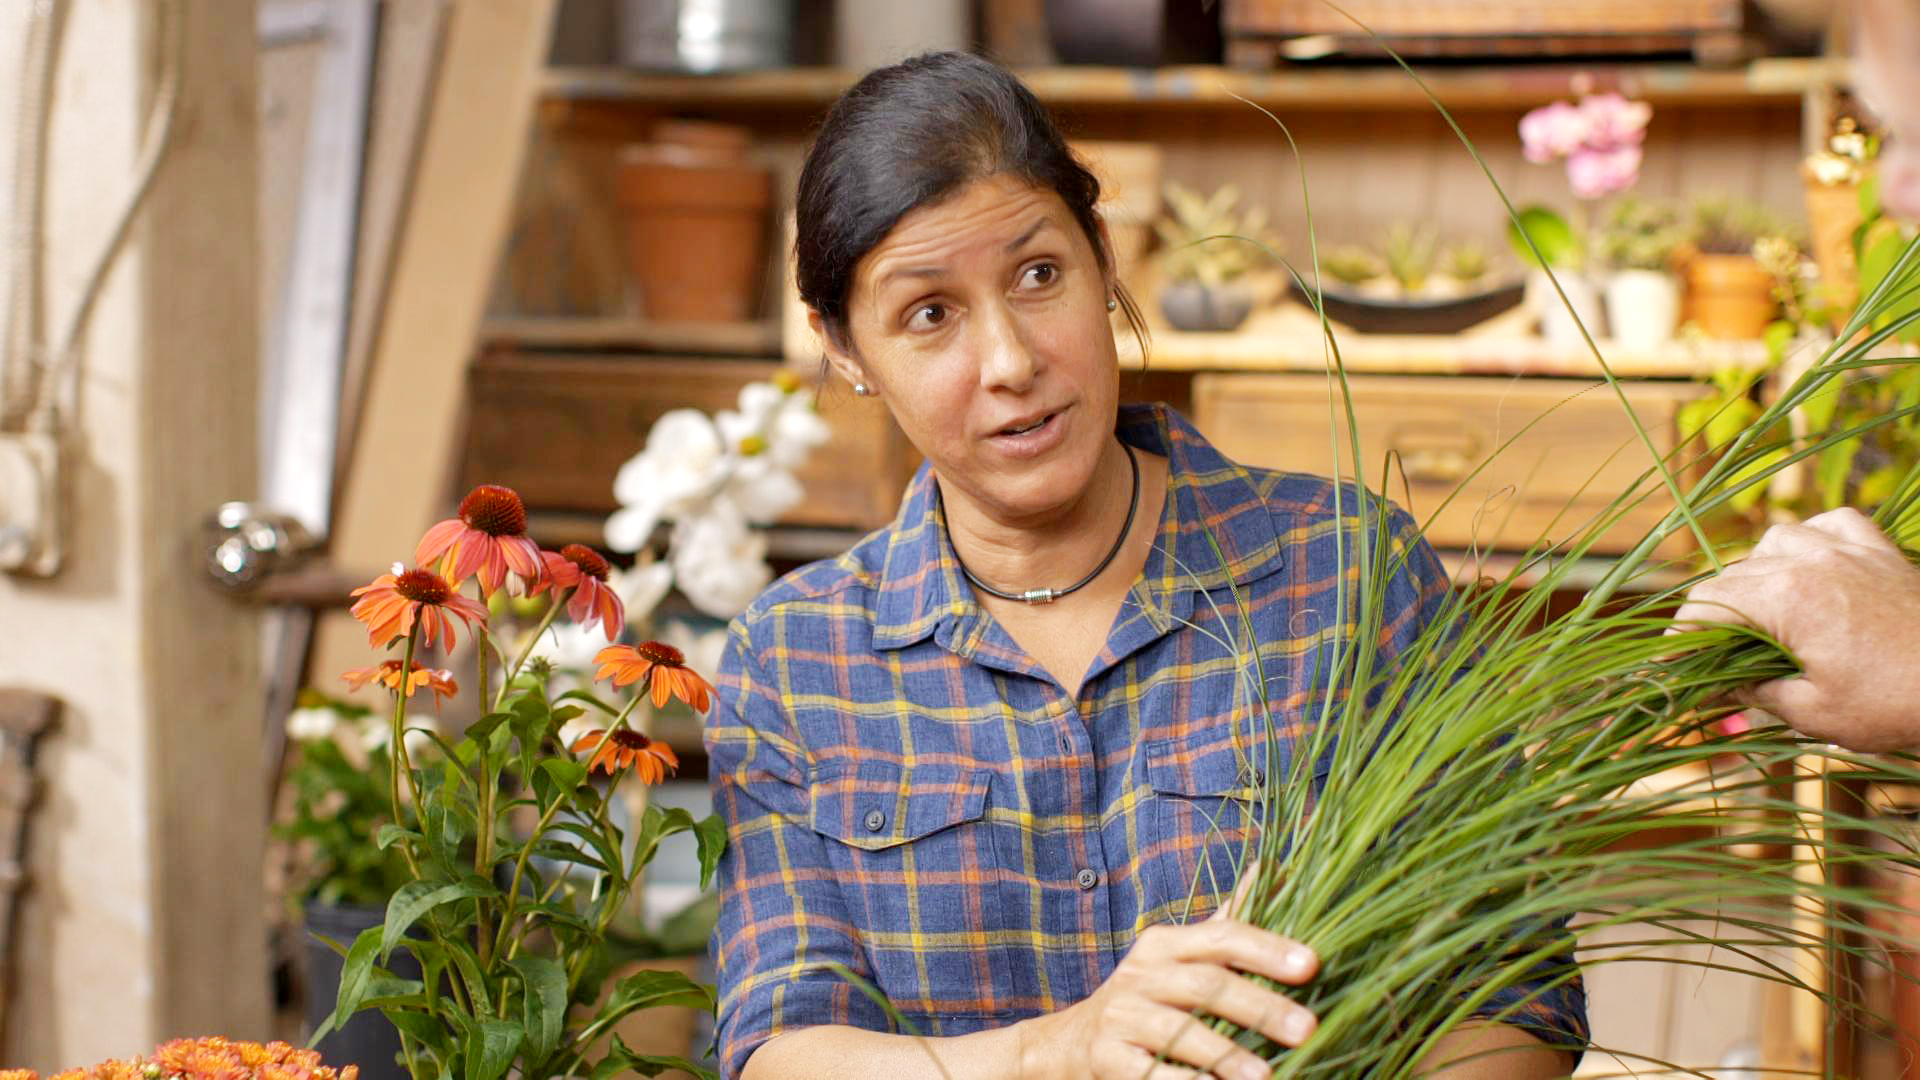 S20 E7, Jenn Nawada discusses protecting plants from cold weather